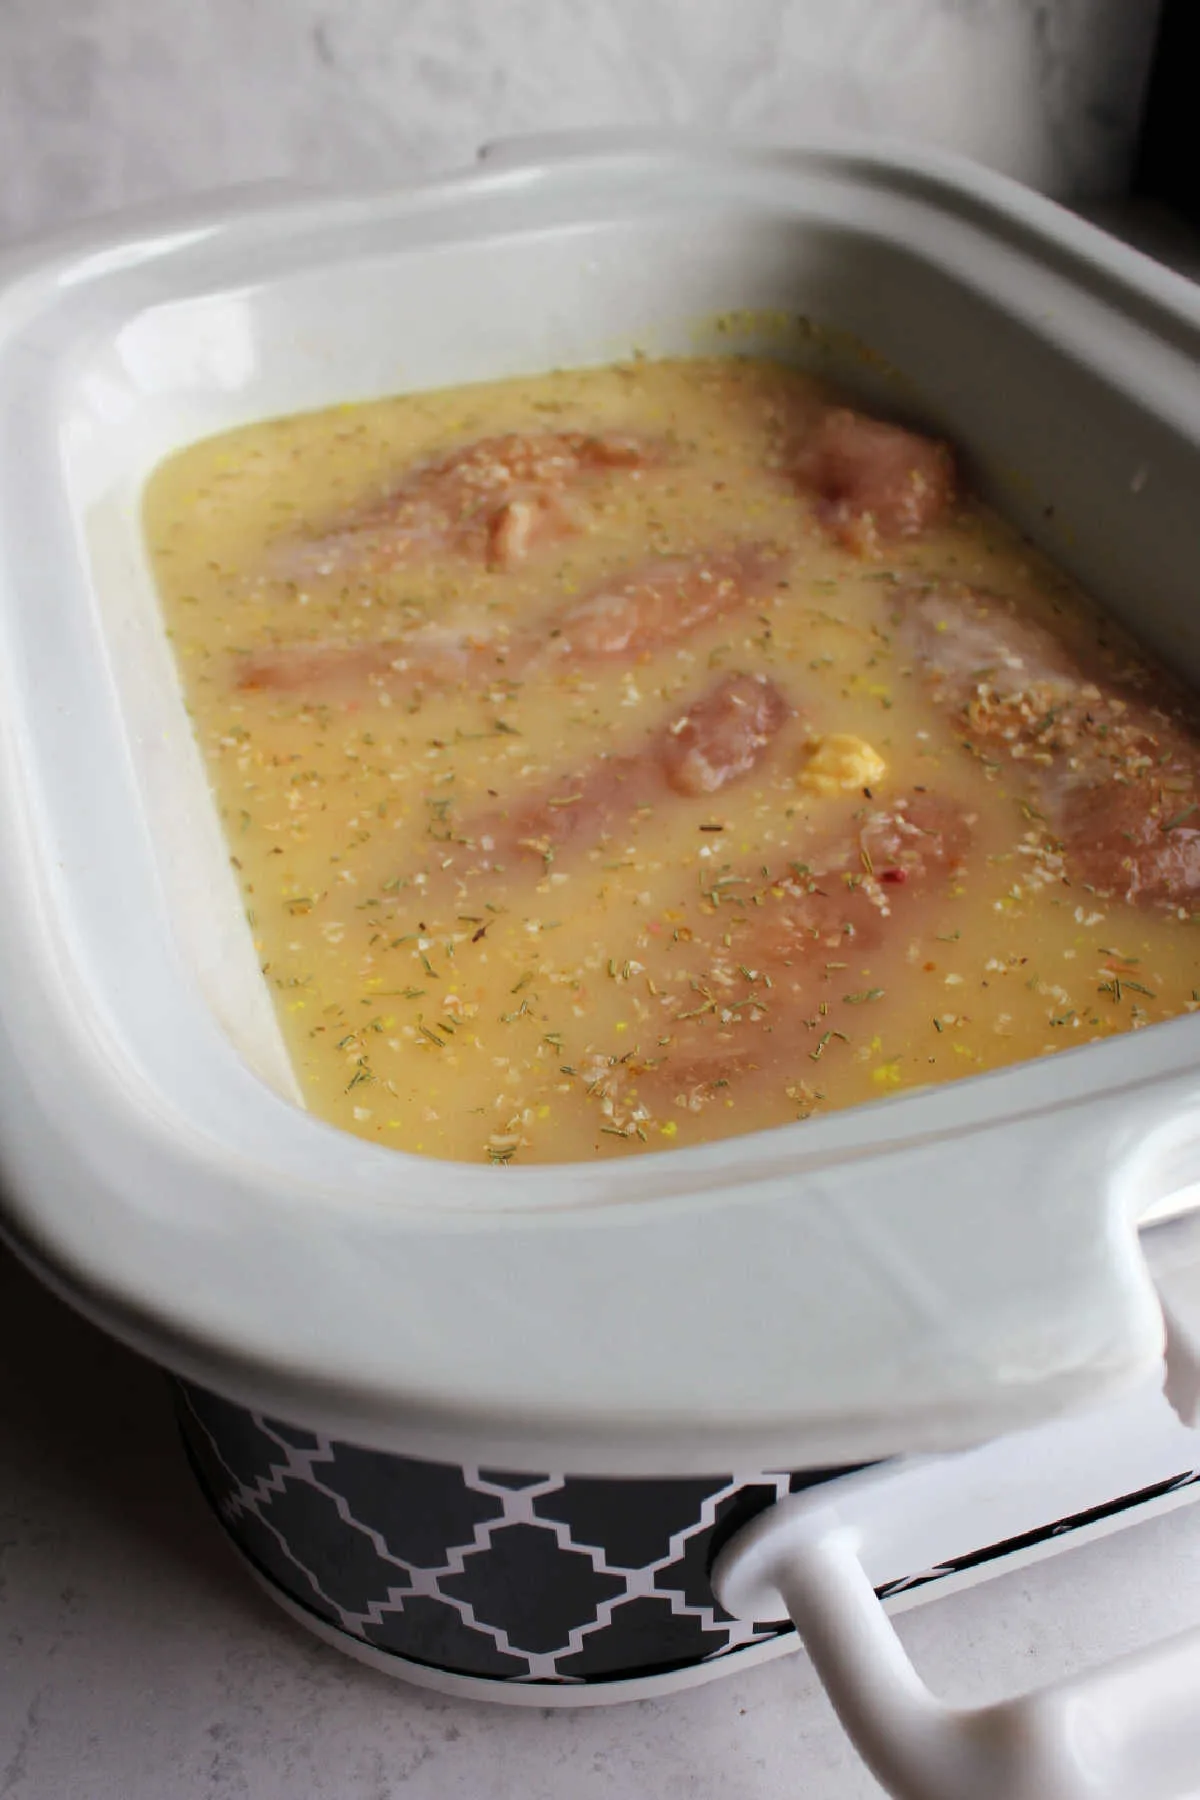 raw chicken in slow cooker with creamy gravy mixture ready to cook.